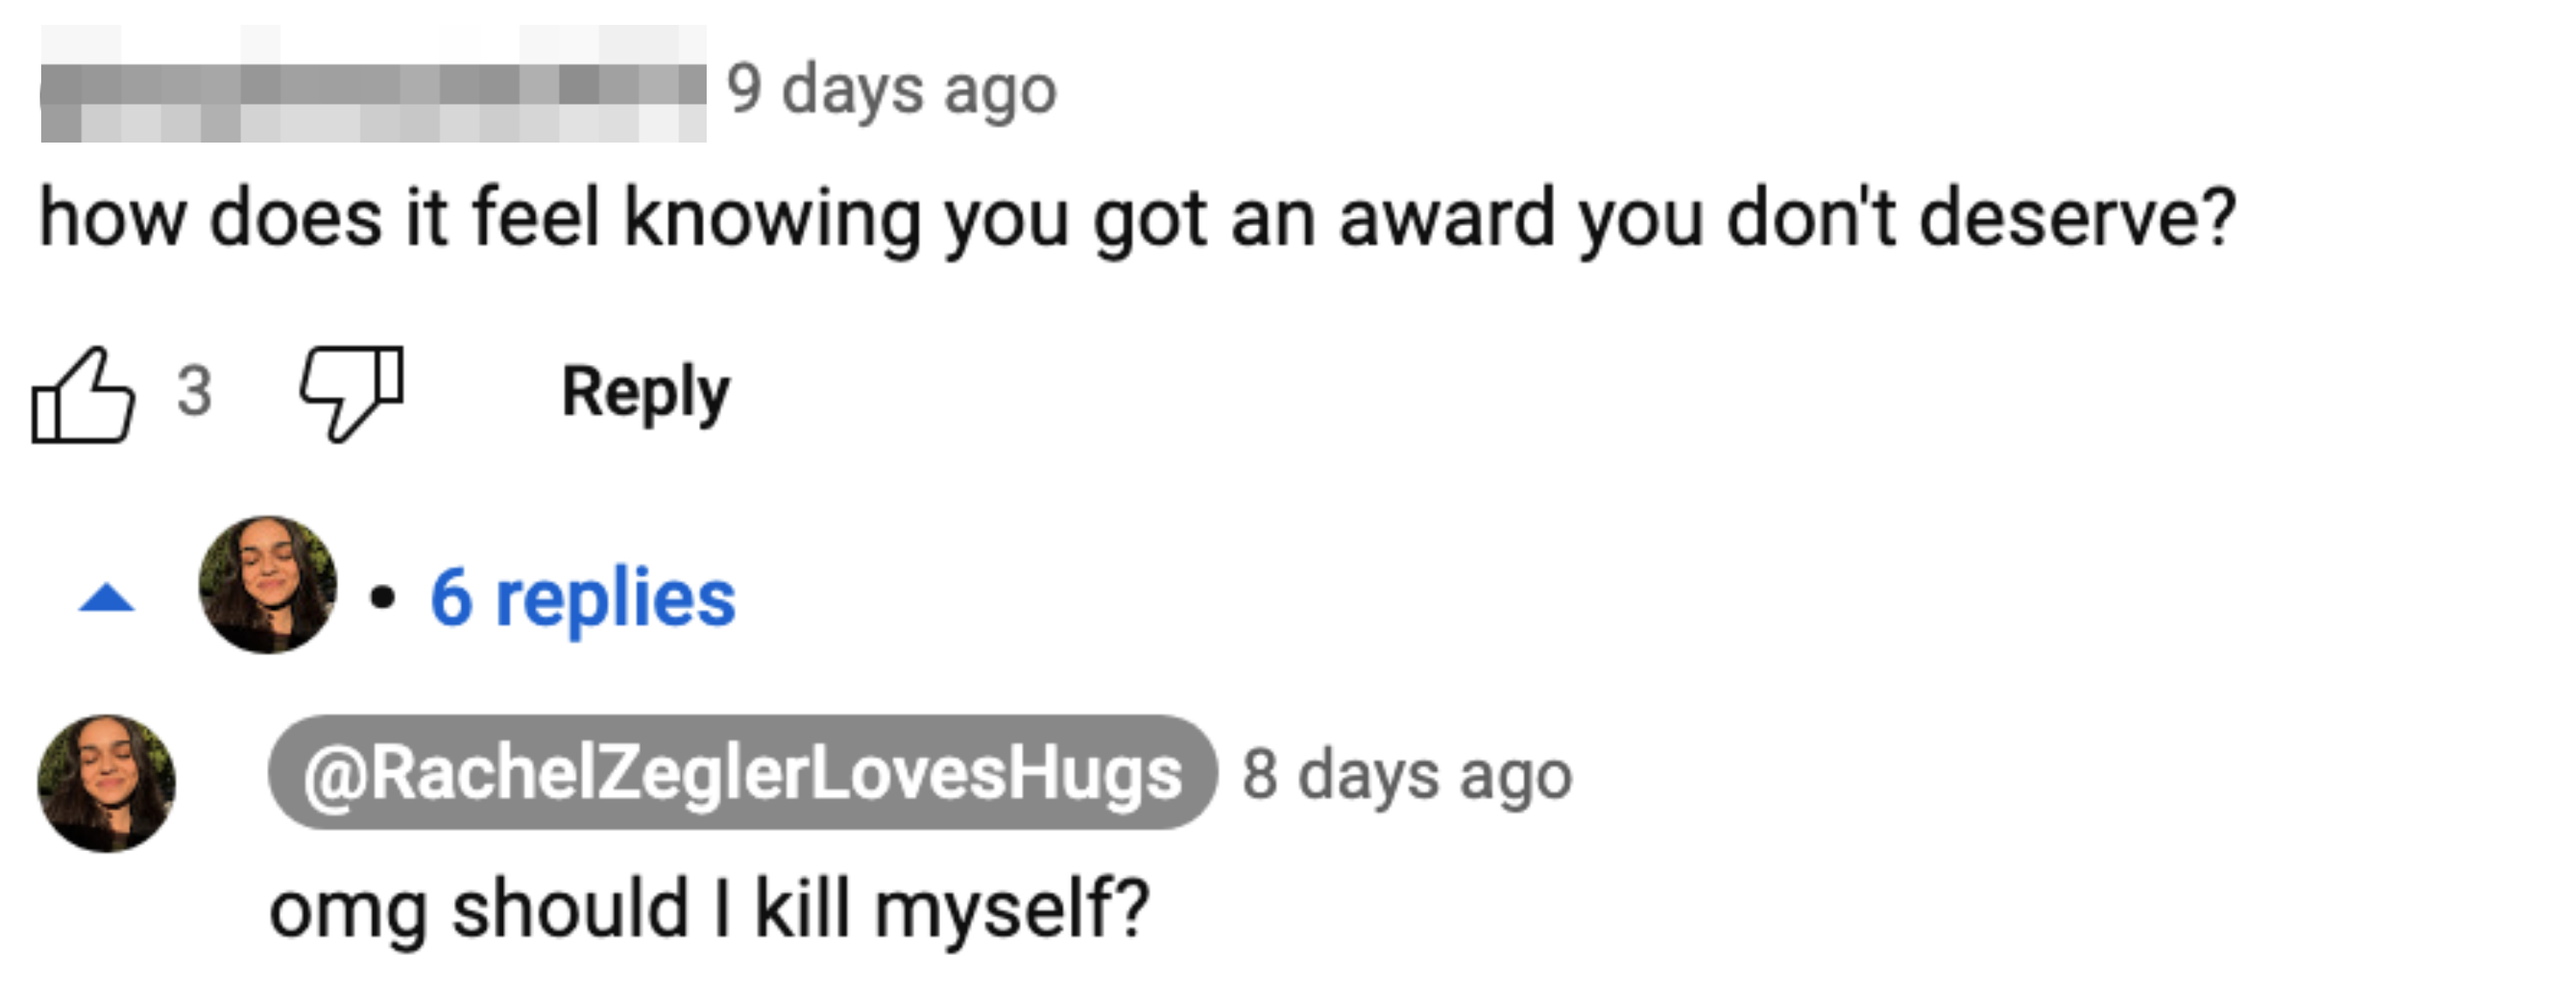 Screenshot of the above comments between a social media user and @RachelZeglerLovesHugs, discussing an undeserved award